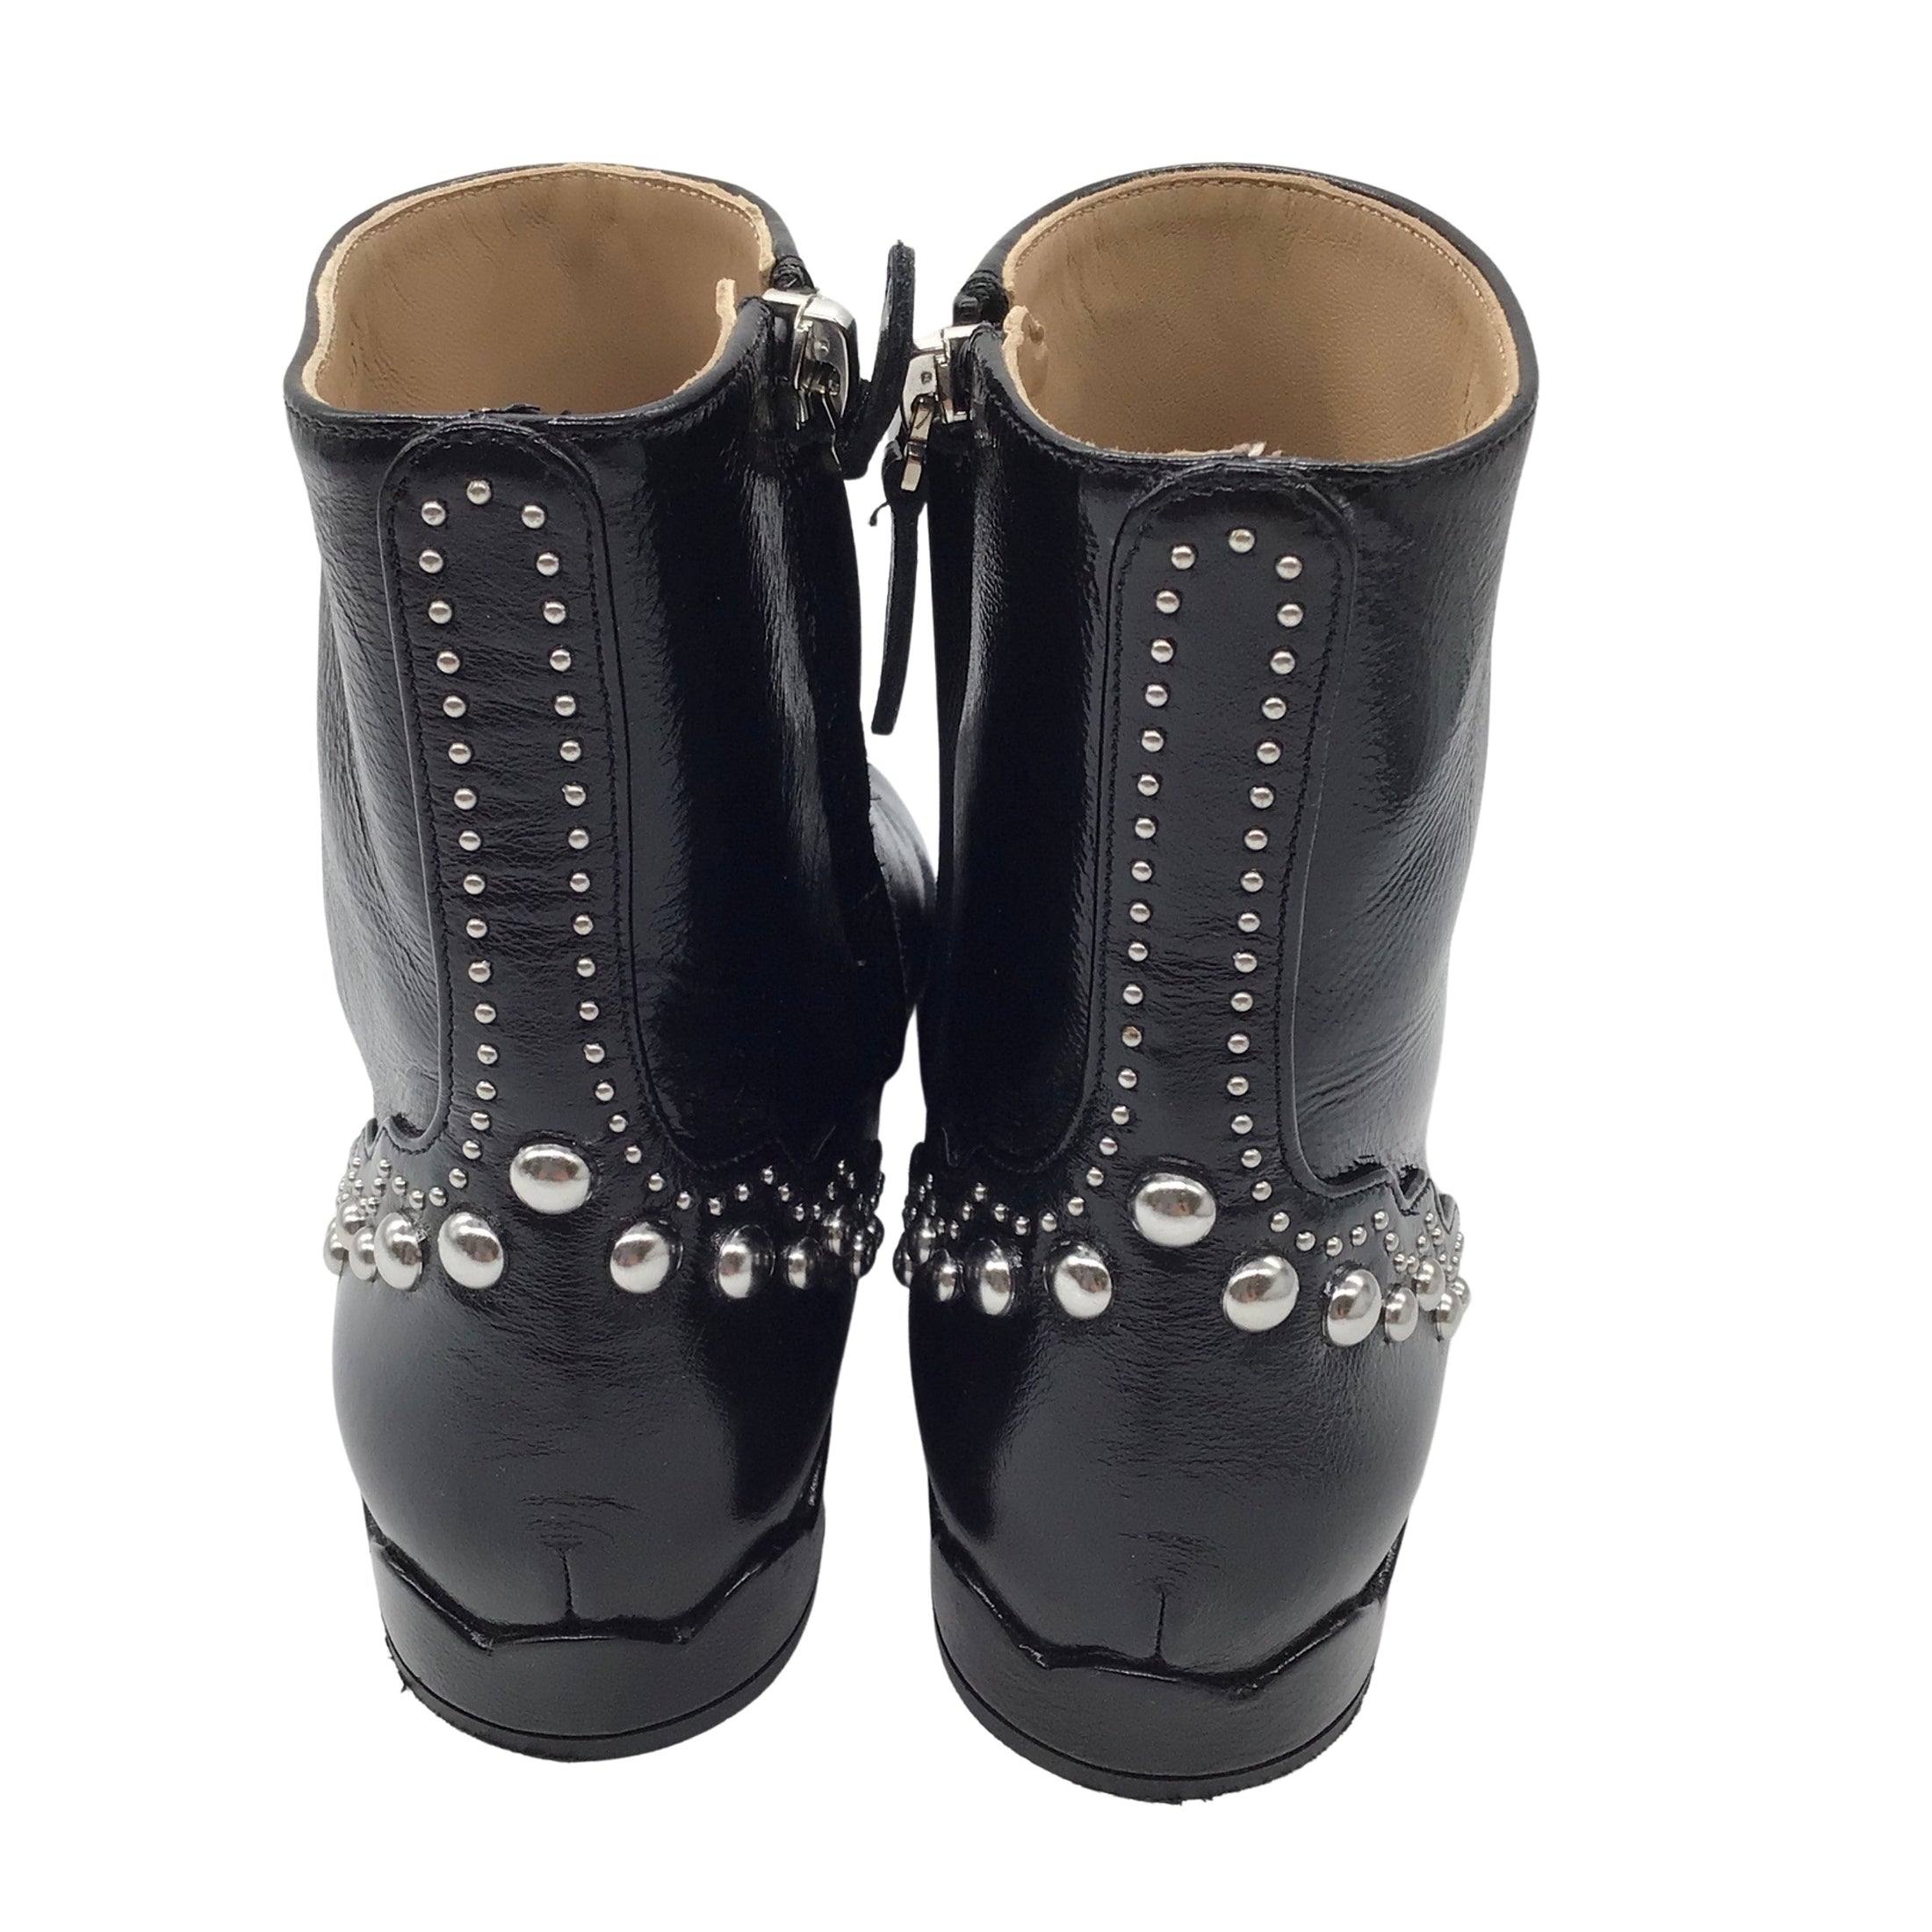 Chloe Black / Silver Studded Leather Ankle Boots